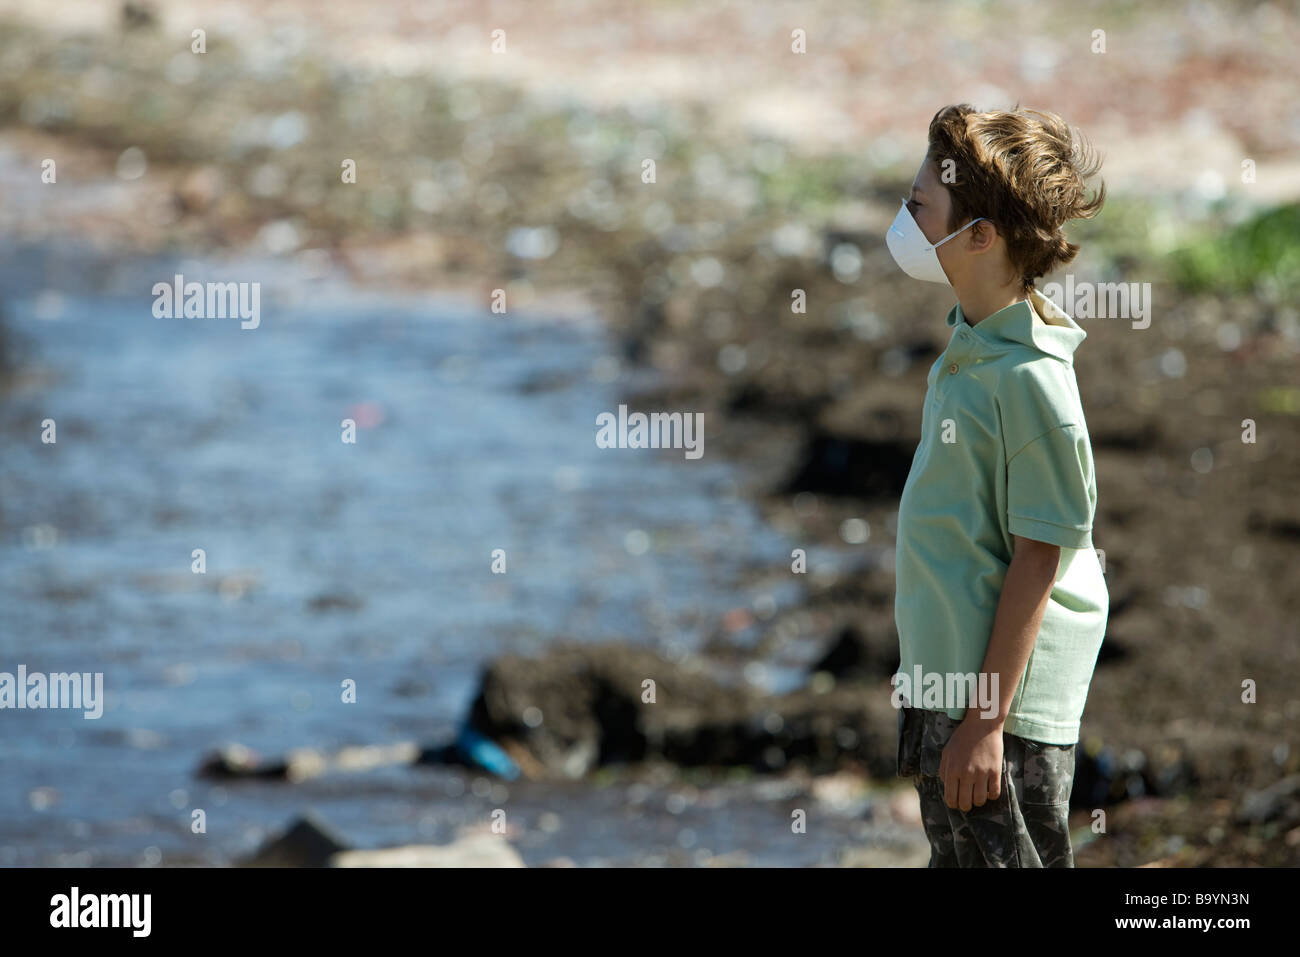 Boy wearing pollution mask, standing on polluted shore Stock Photo